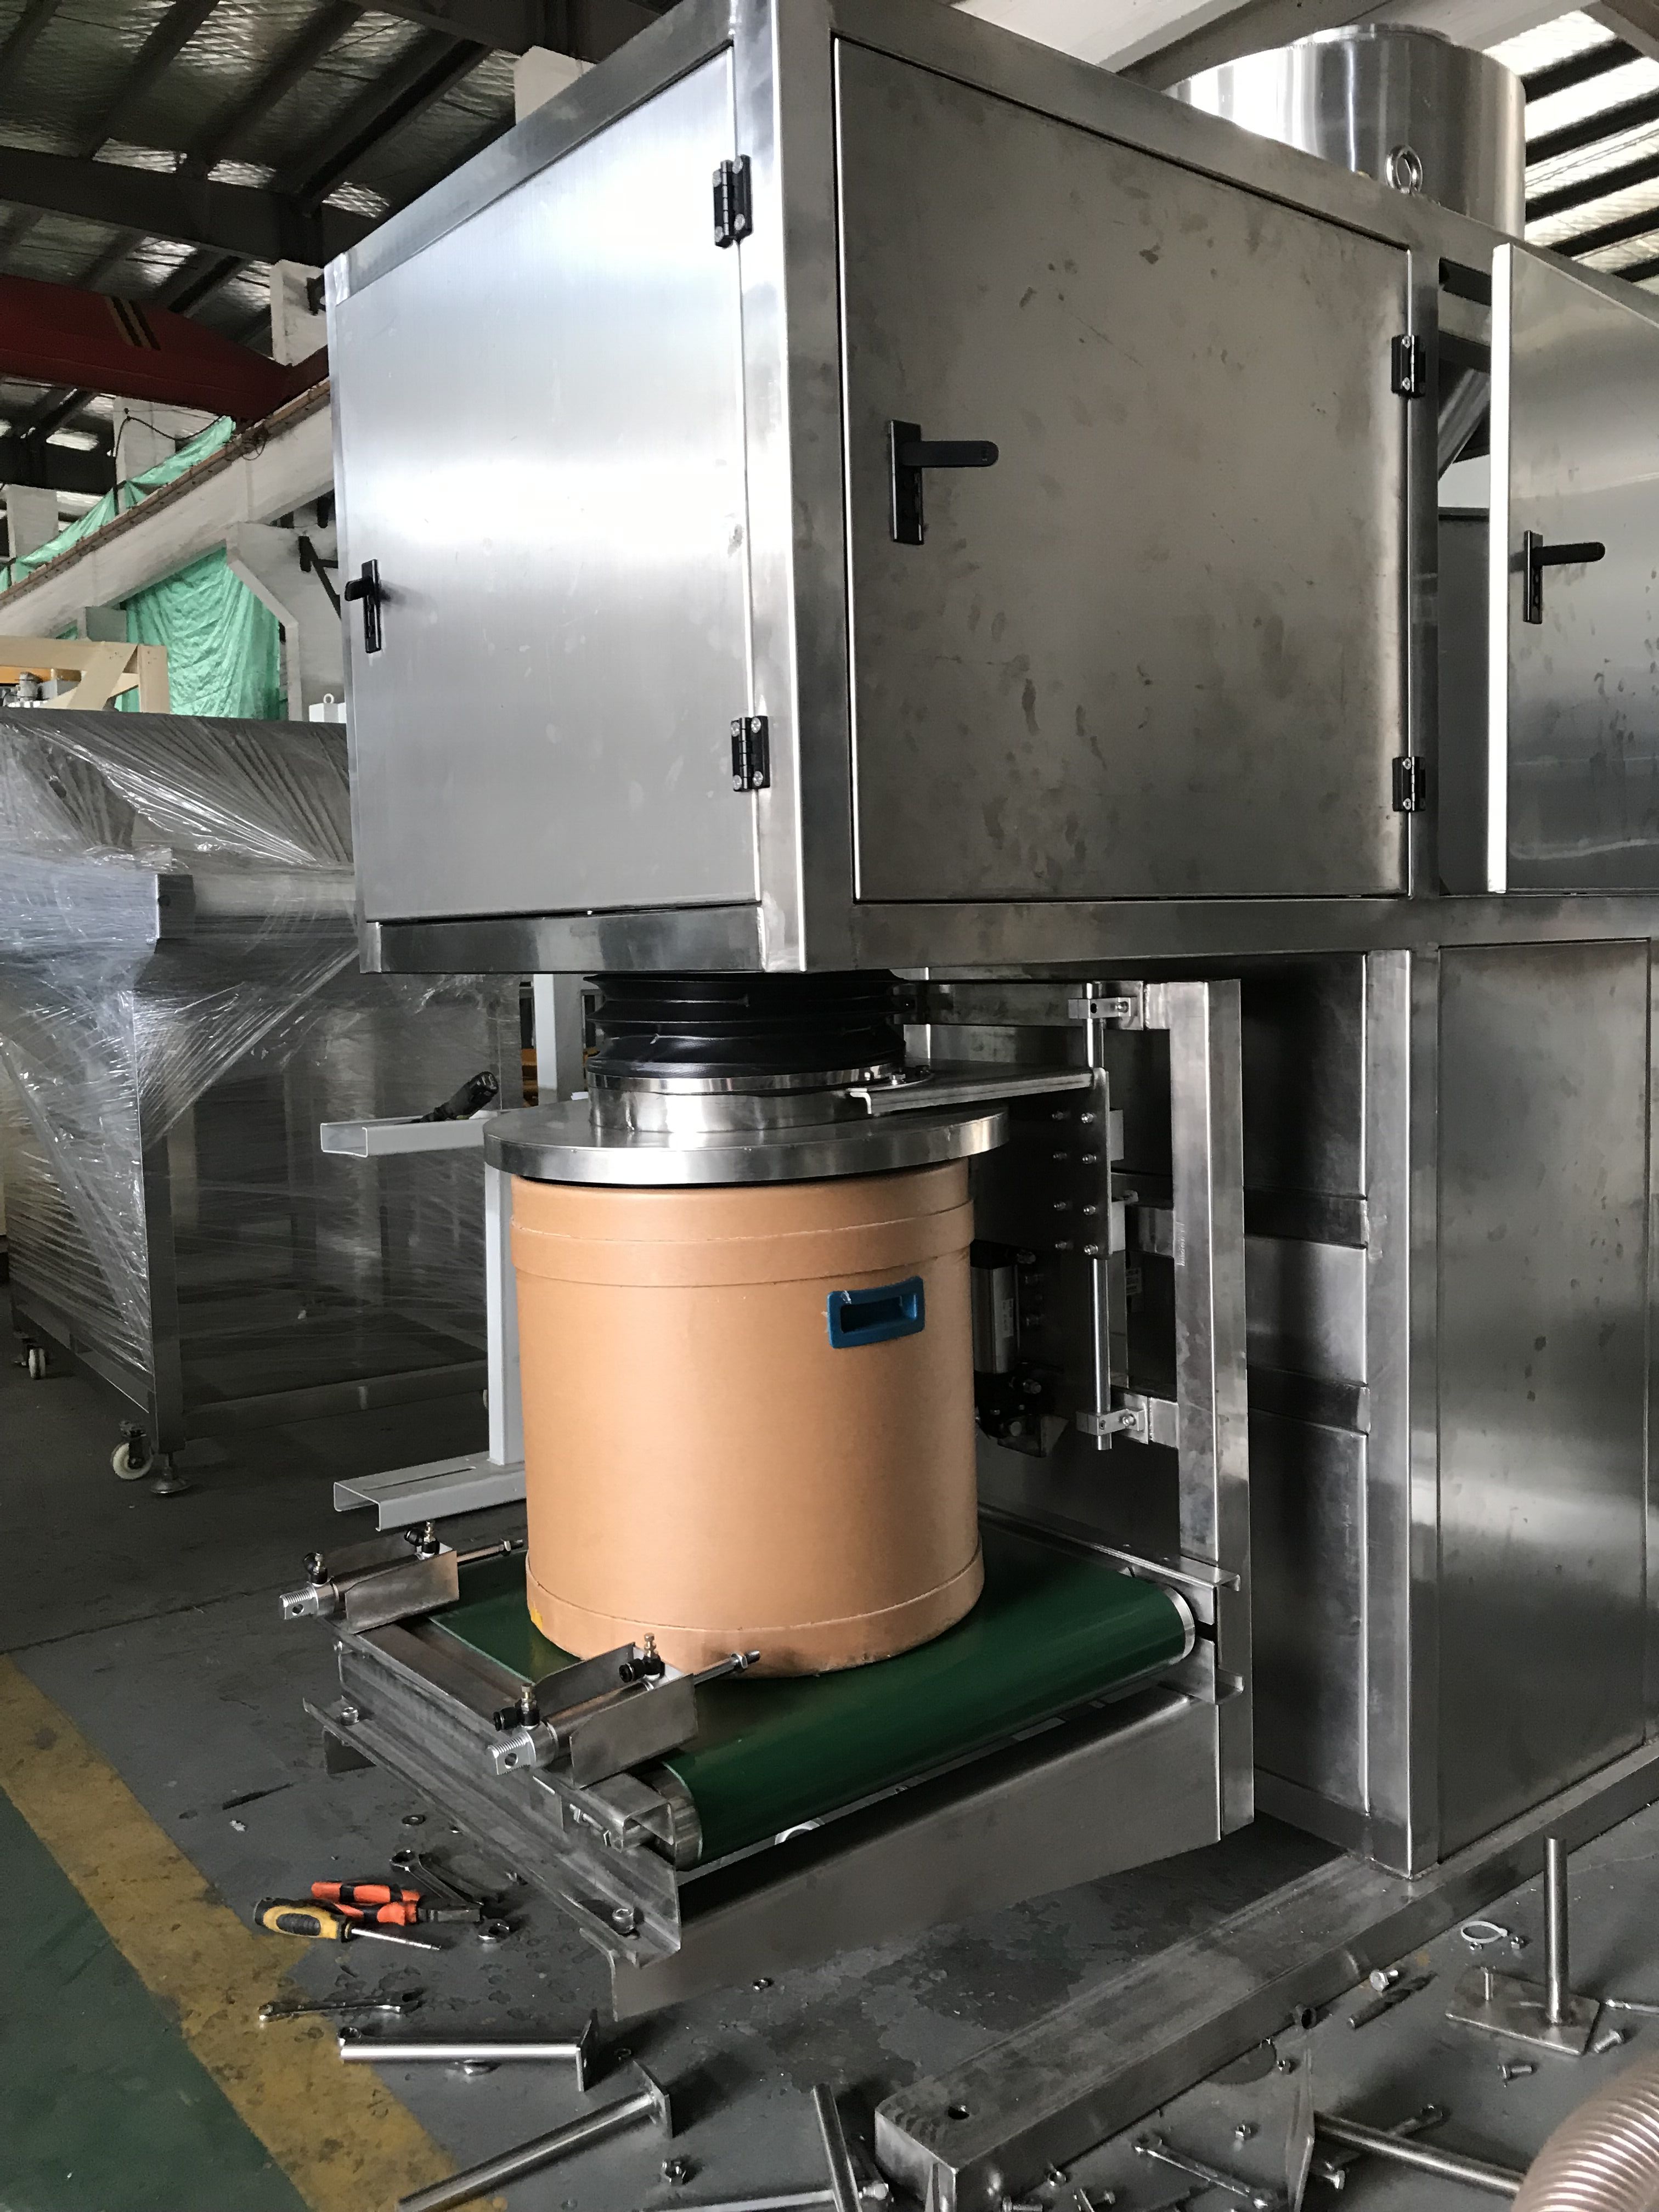 PAILS FILLING MACHINE Grain Bagging Machine Granulated Fertilizers Packing Machine Air sucking type packing machine for packing Powder products 5kg bag fully automatic packing and palletising line Woo